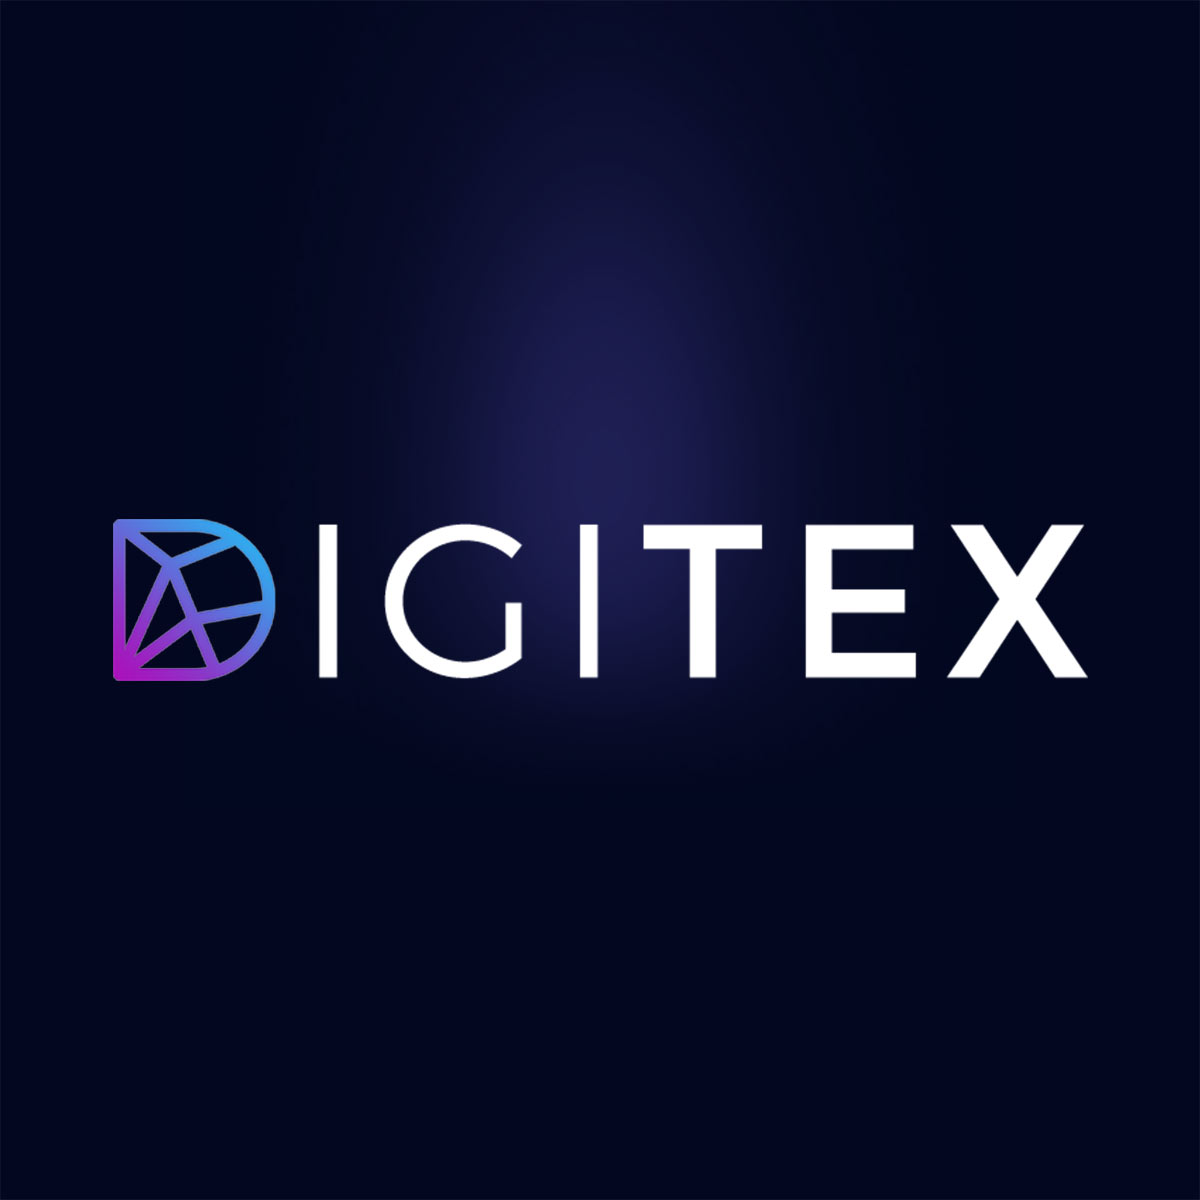 Digitex Futures, Commission-Free Bitcoin Futures Trading